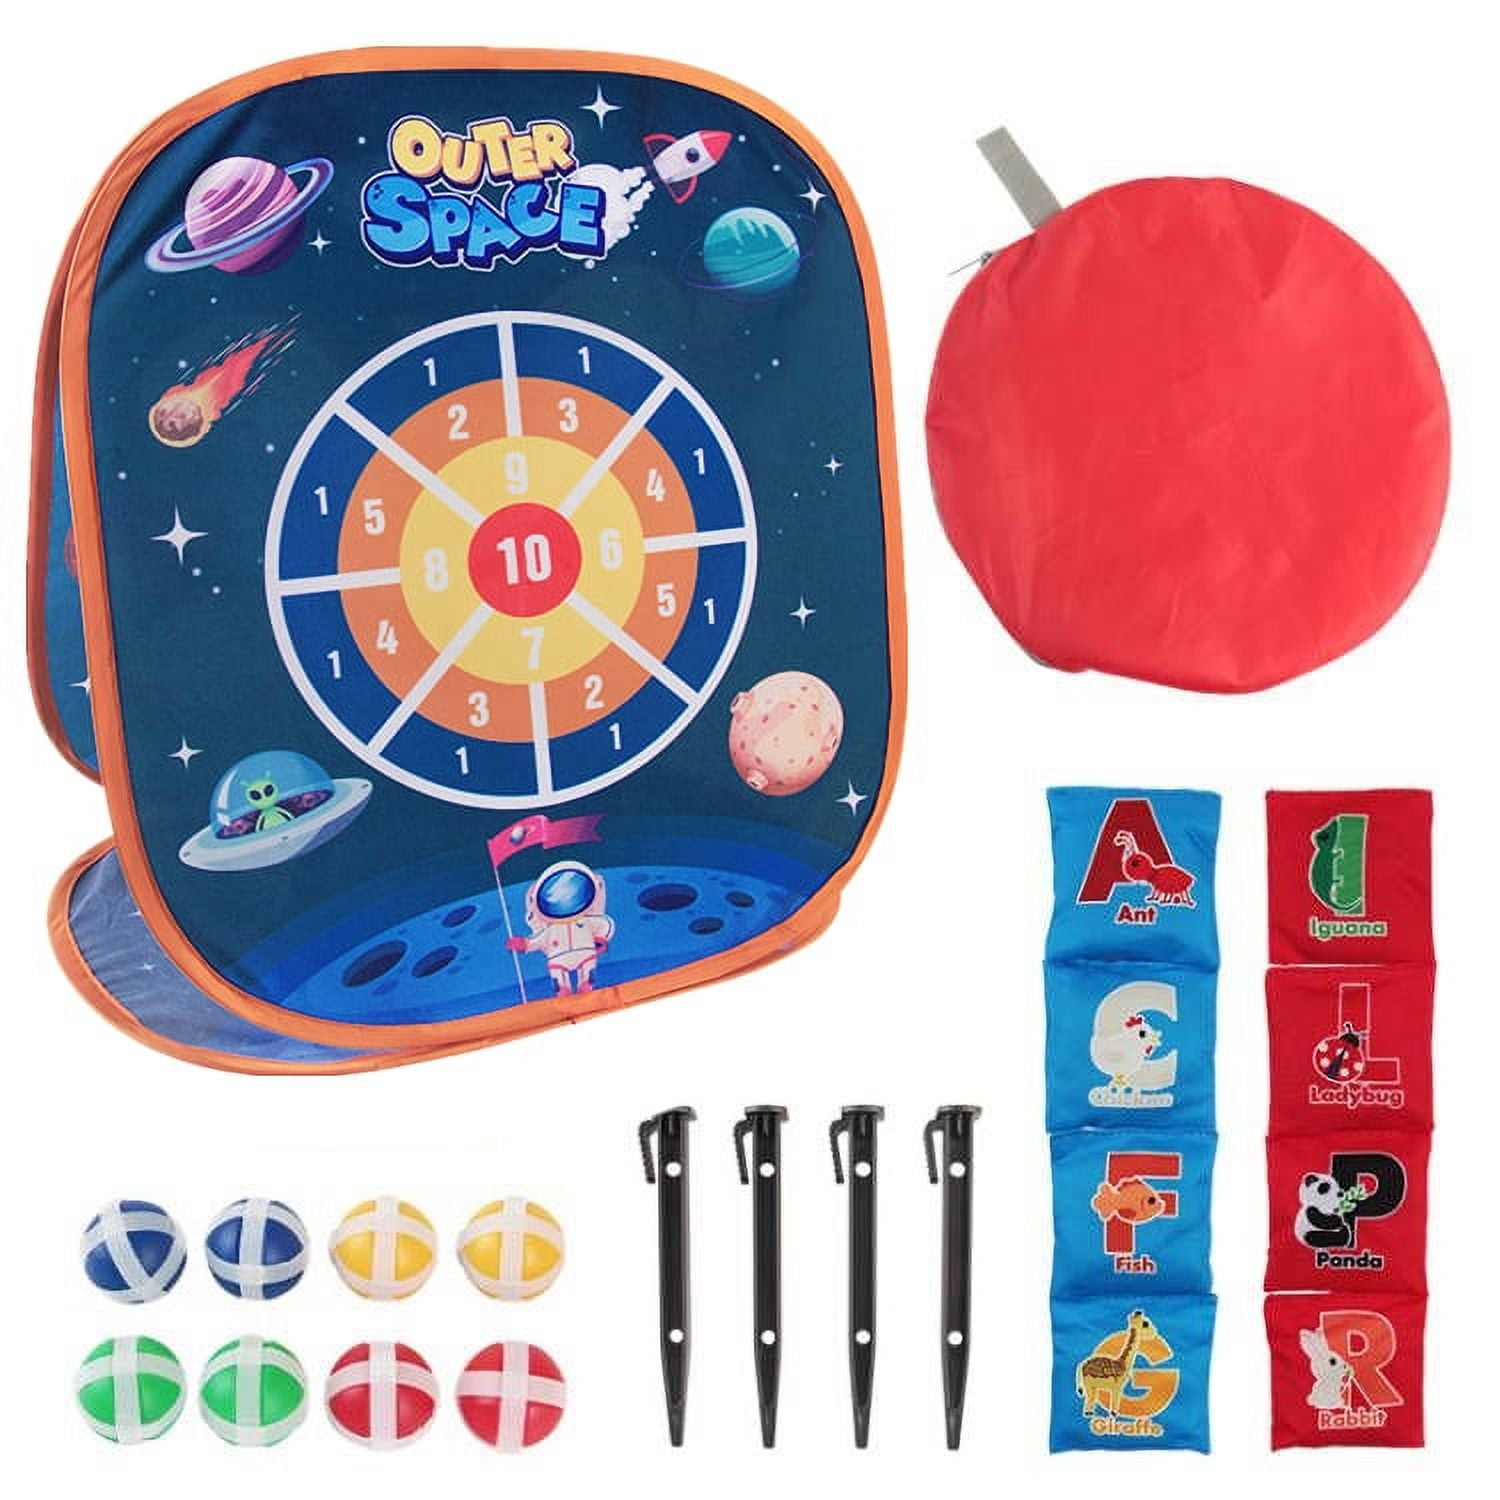 Boy Toys Age 8-10 Years Old Throw Game Sticky Board Child